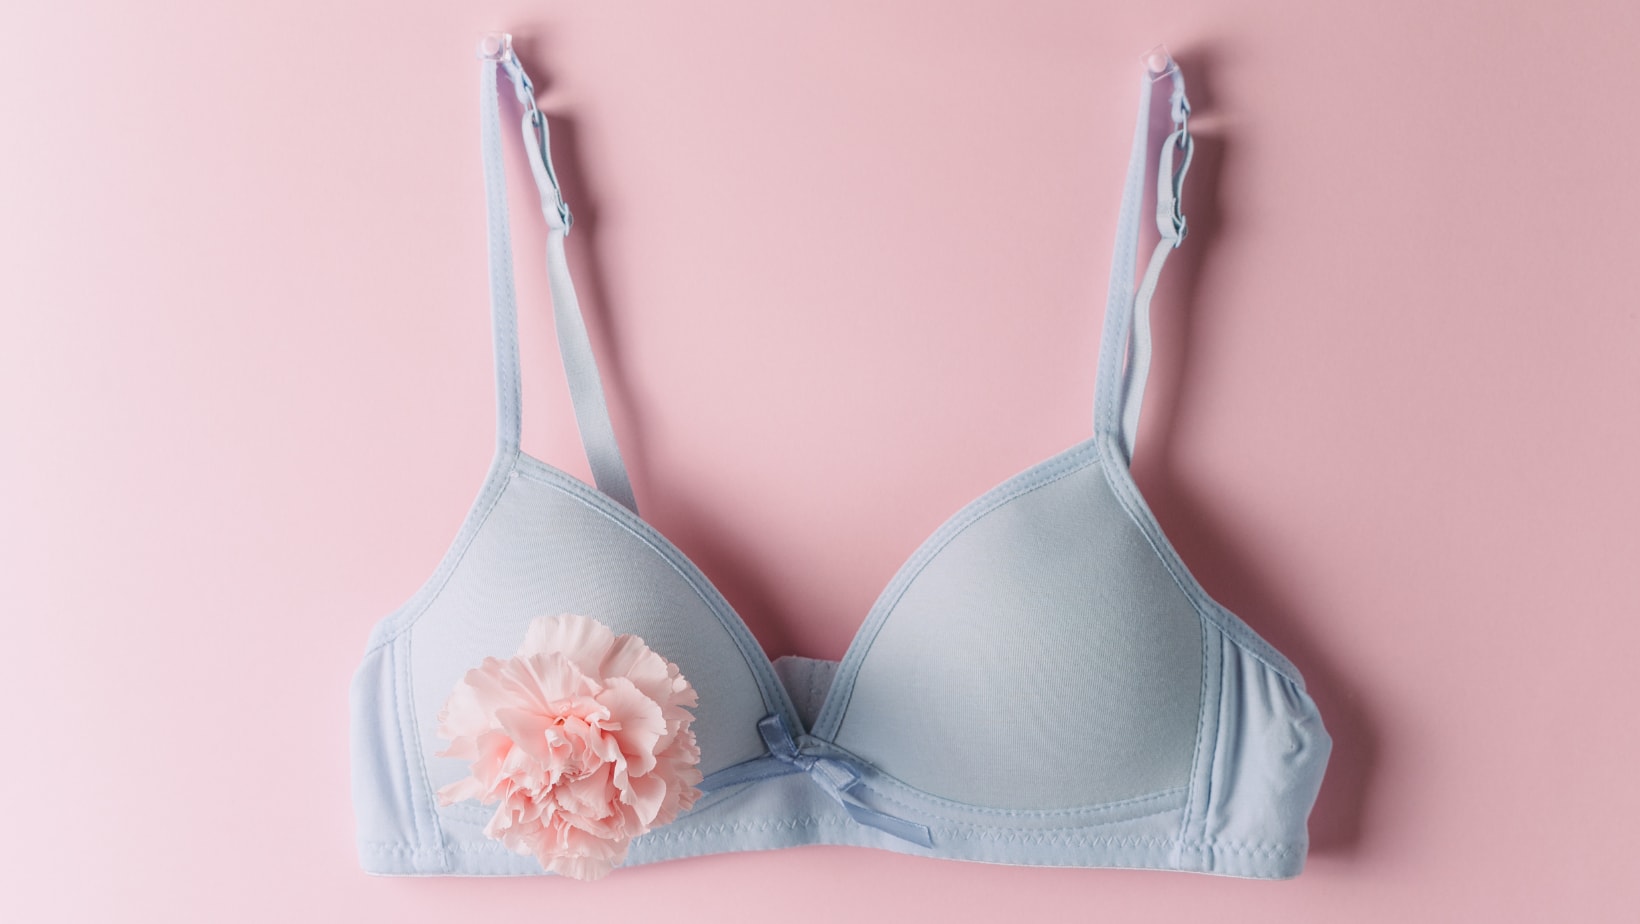 Breast Cancer Awareness: Should 'No Bra Day' be celebrated in